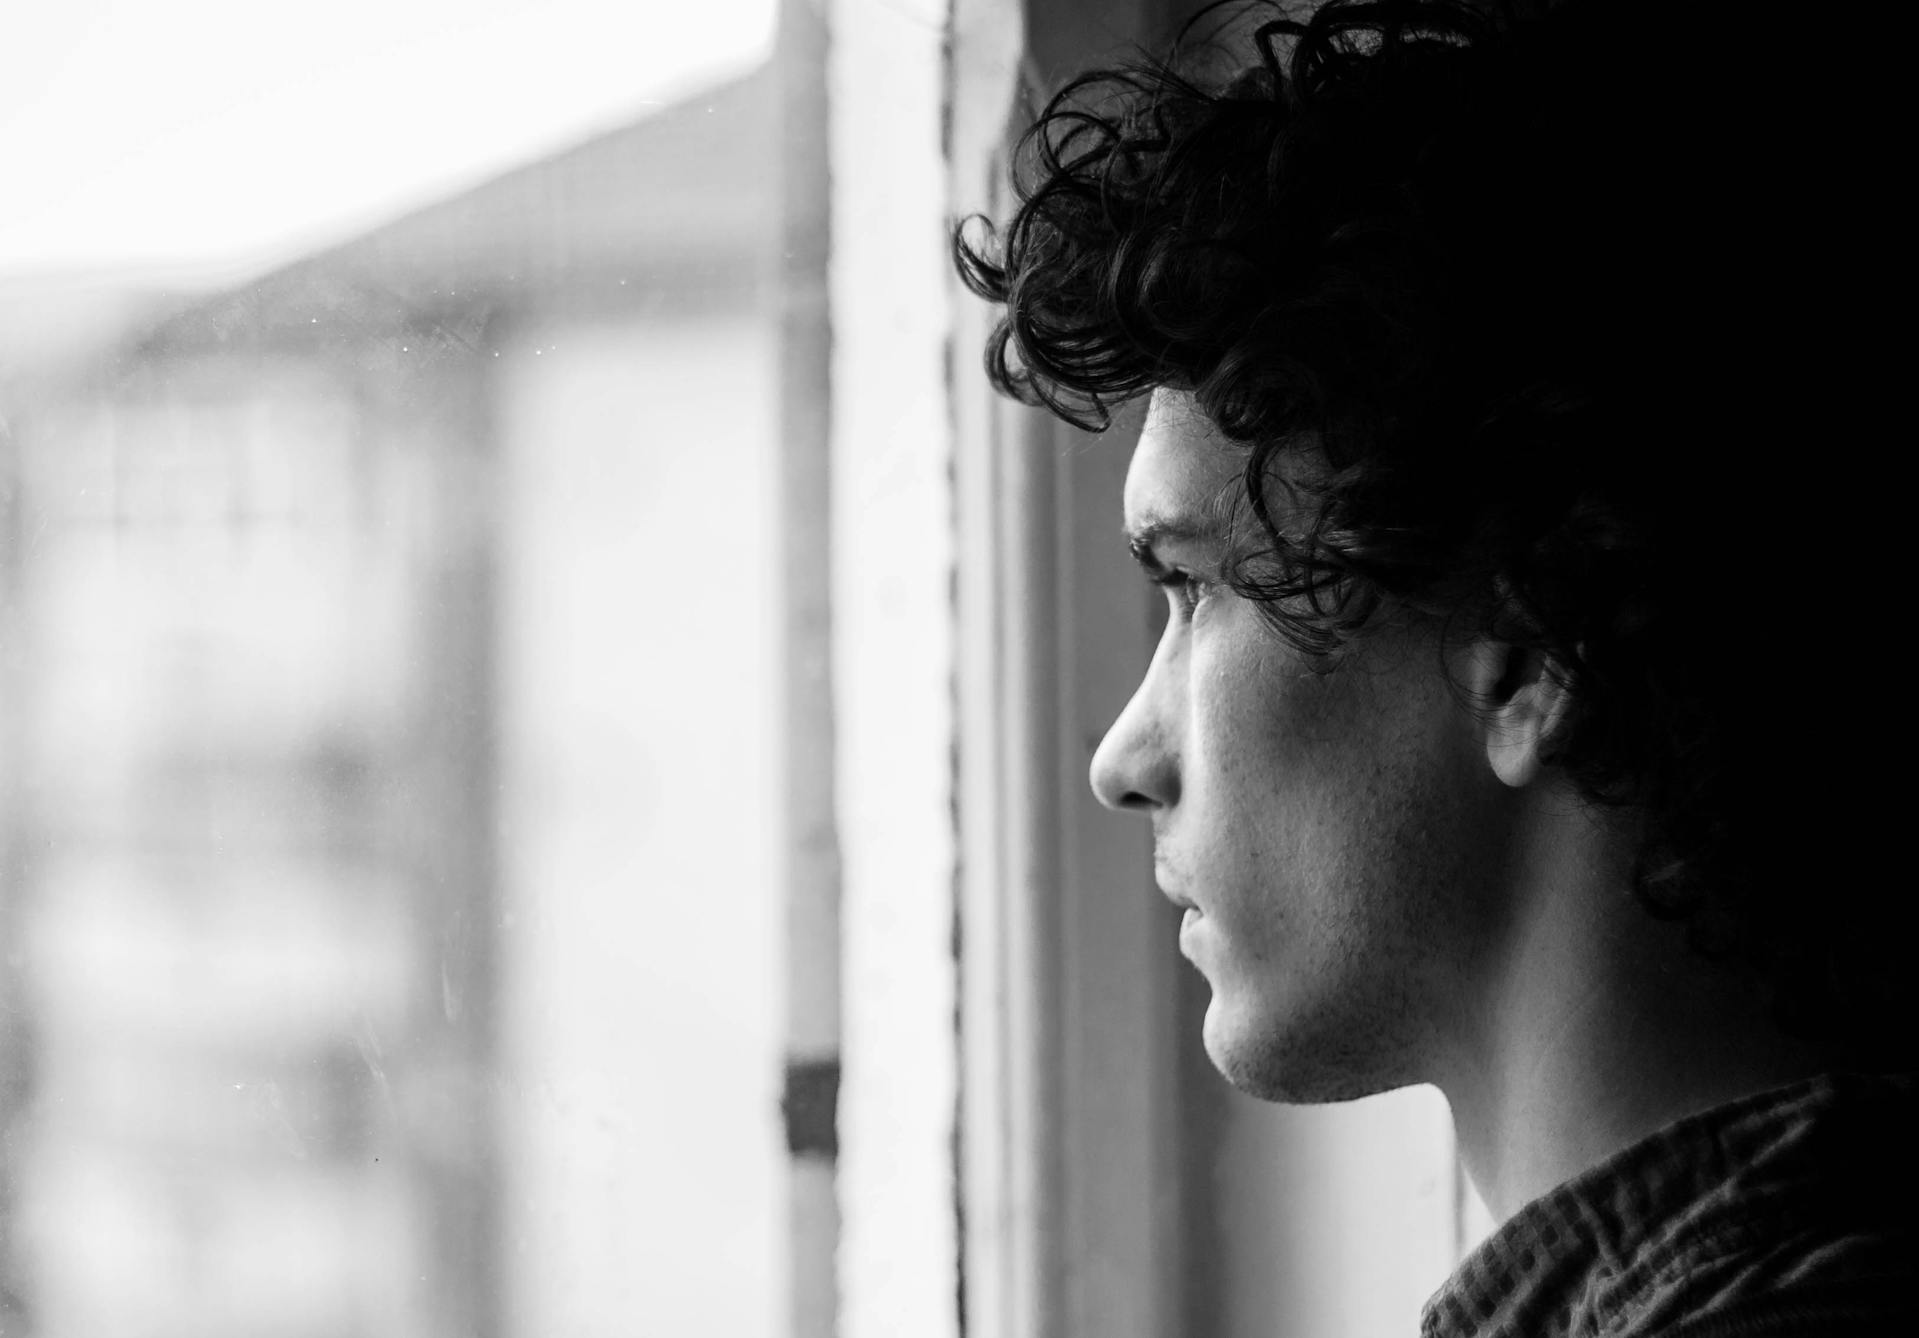 A young man looking out the window | Source: Pexels